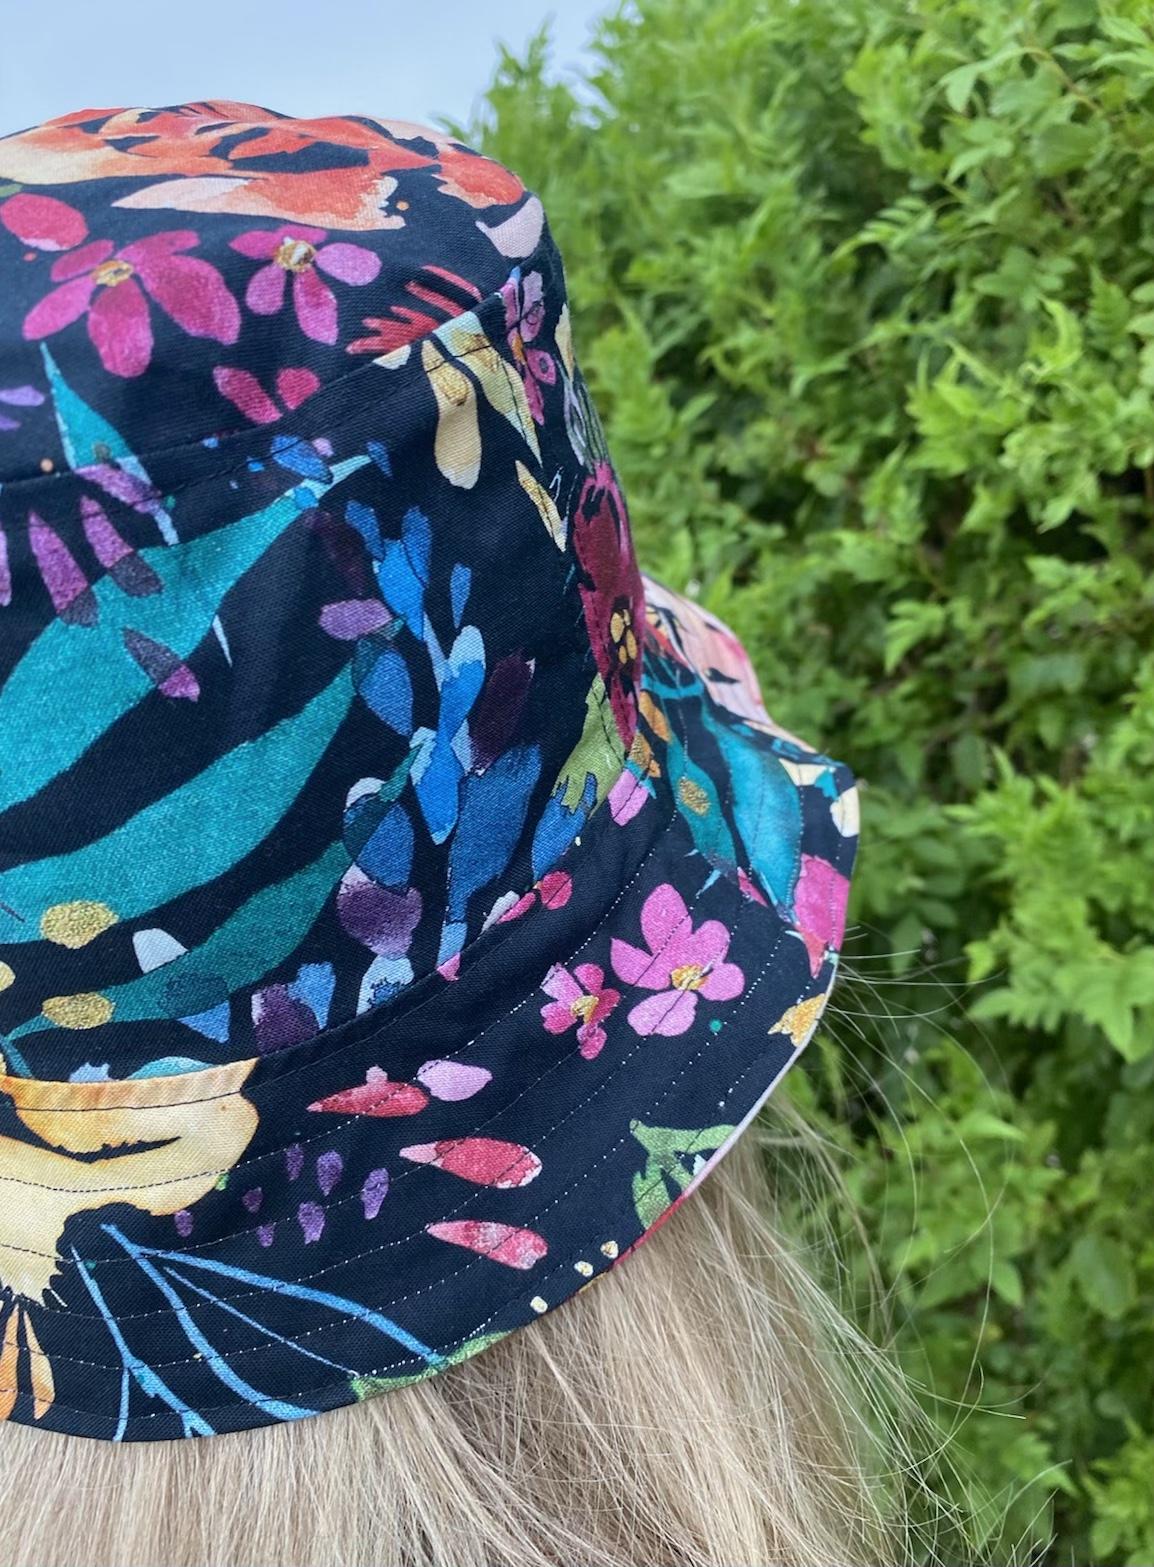 Rear side view close up of same hat in different print, worn by adult woman